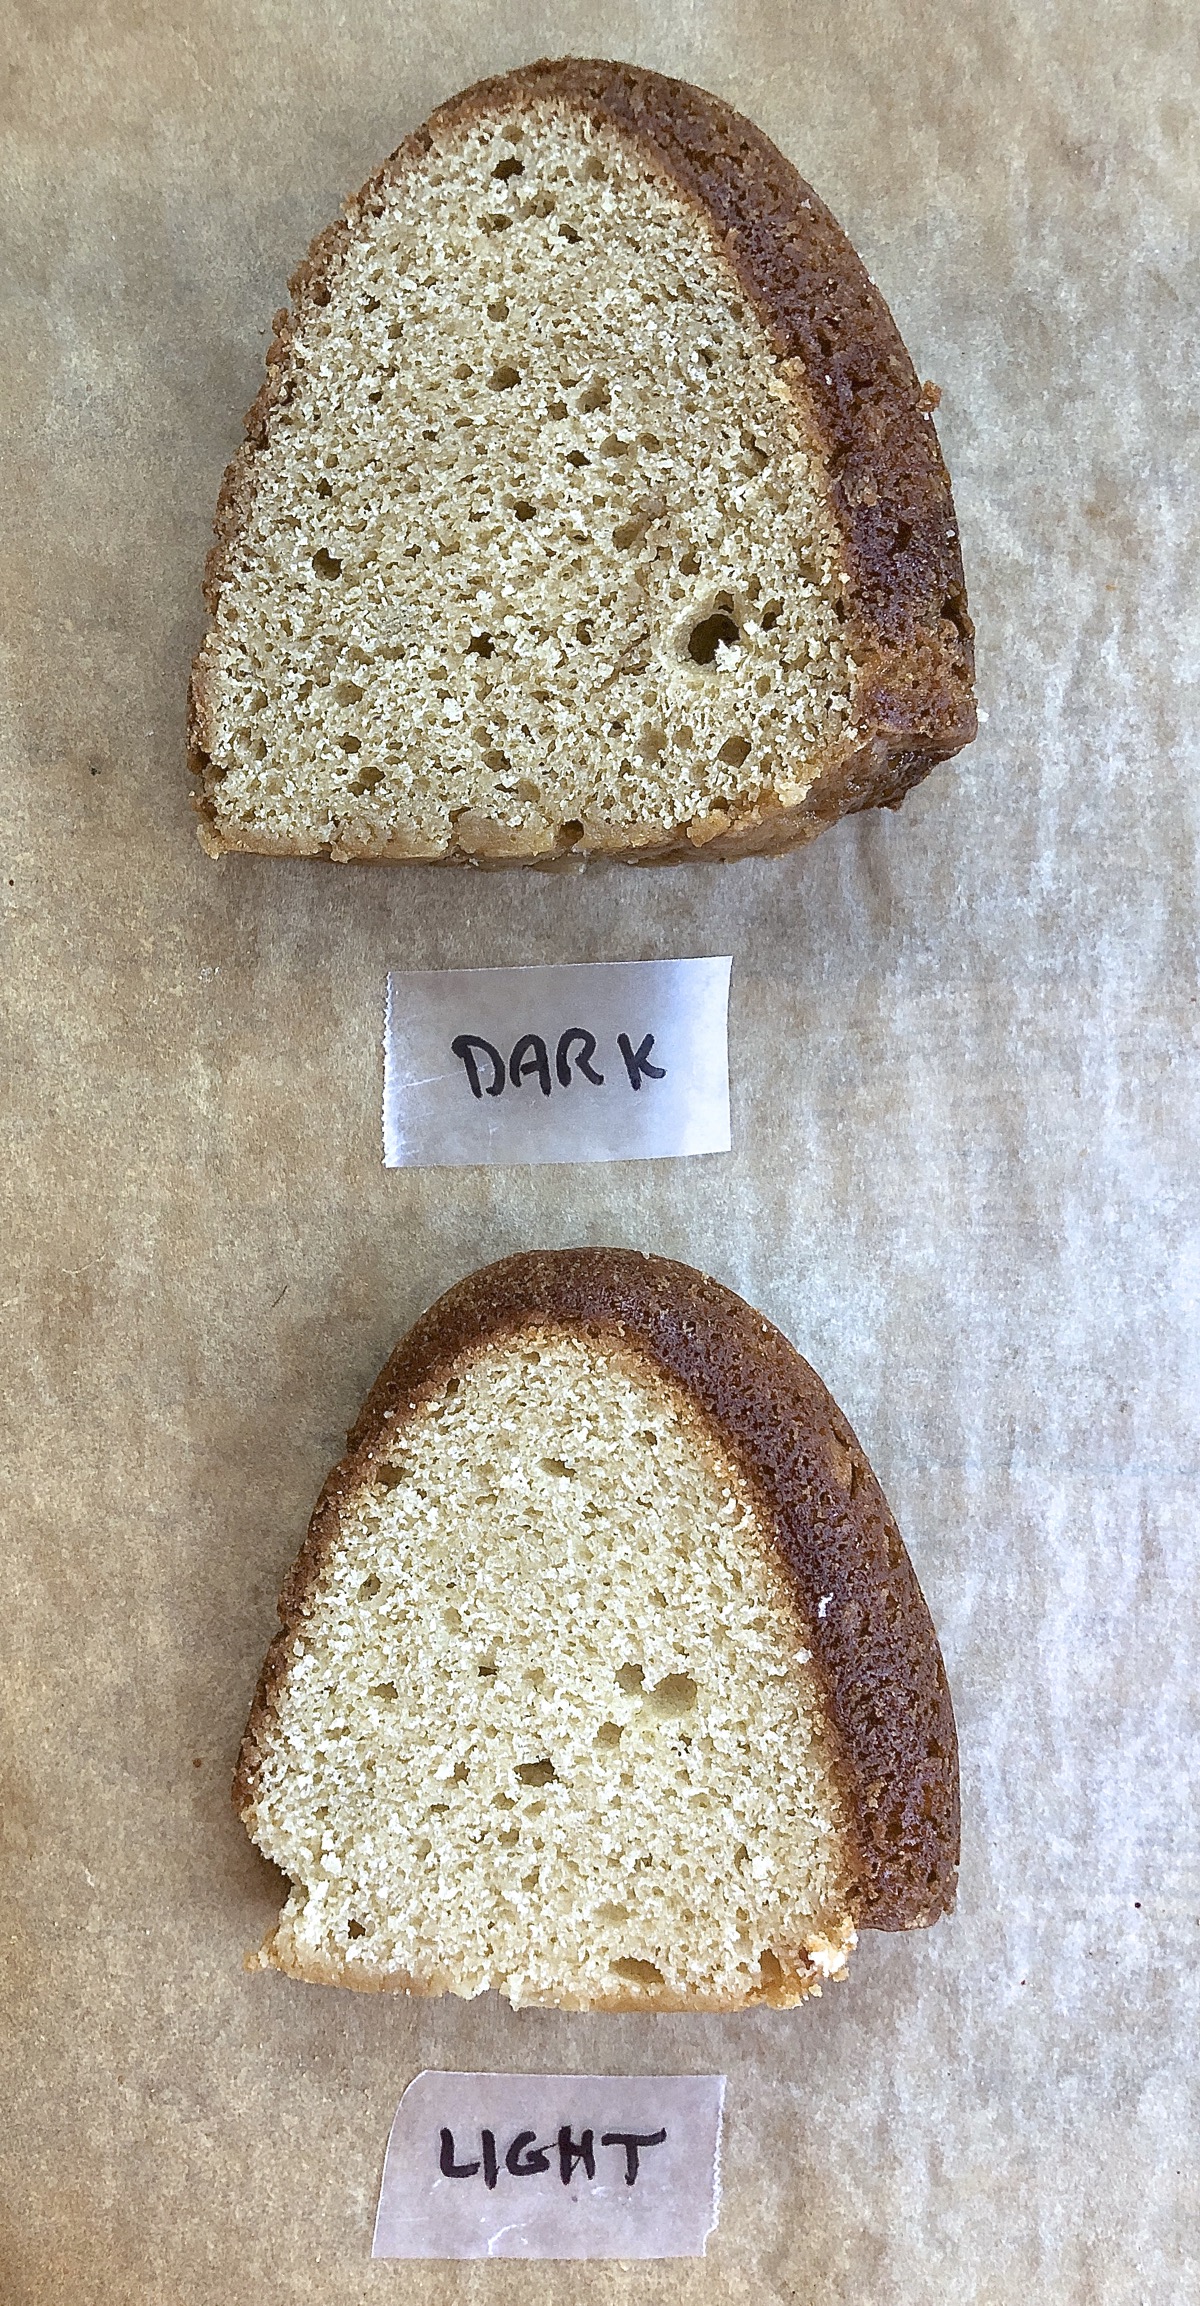 Two slices of pound cake, one made with light brown sugar, one with dark brown sugar.